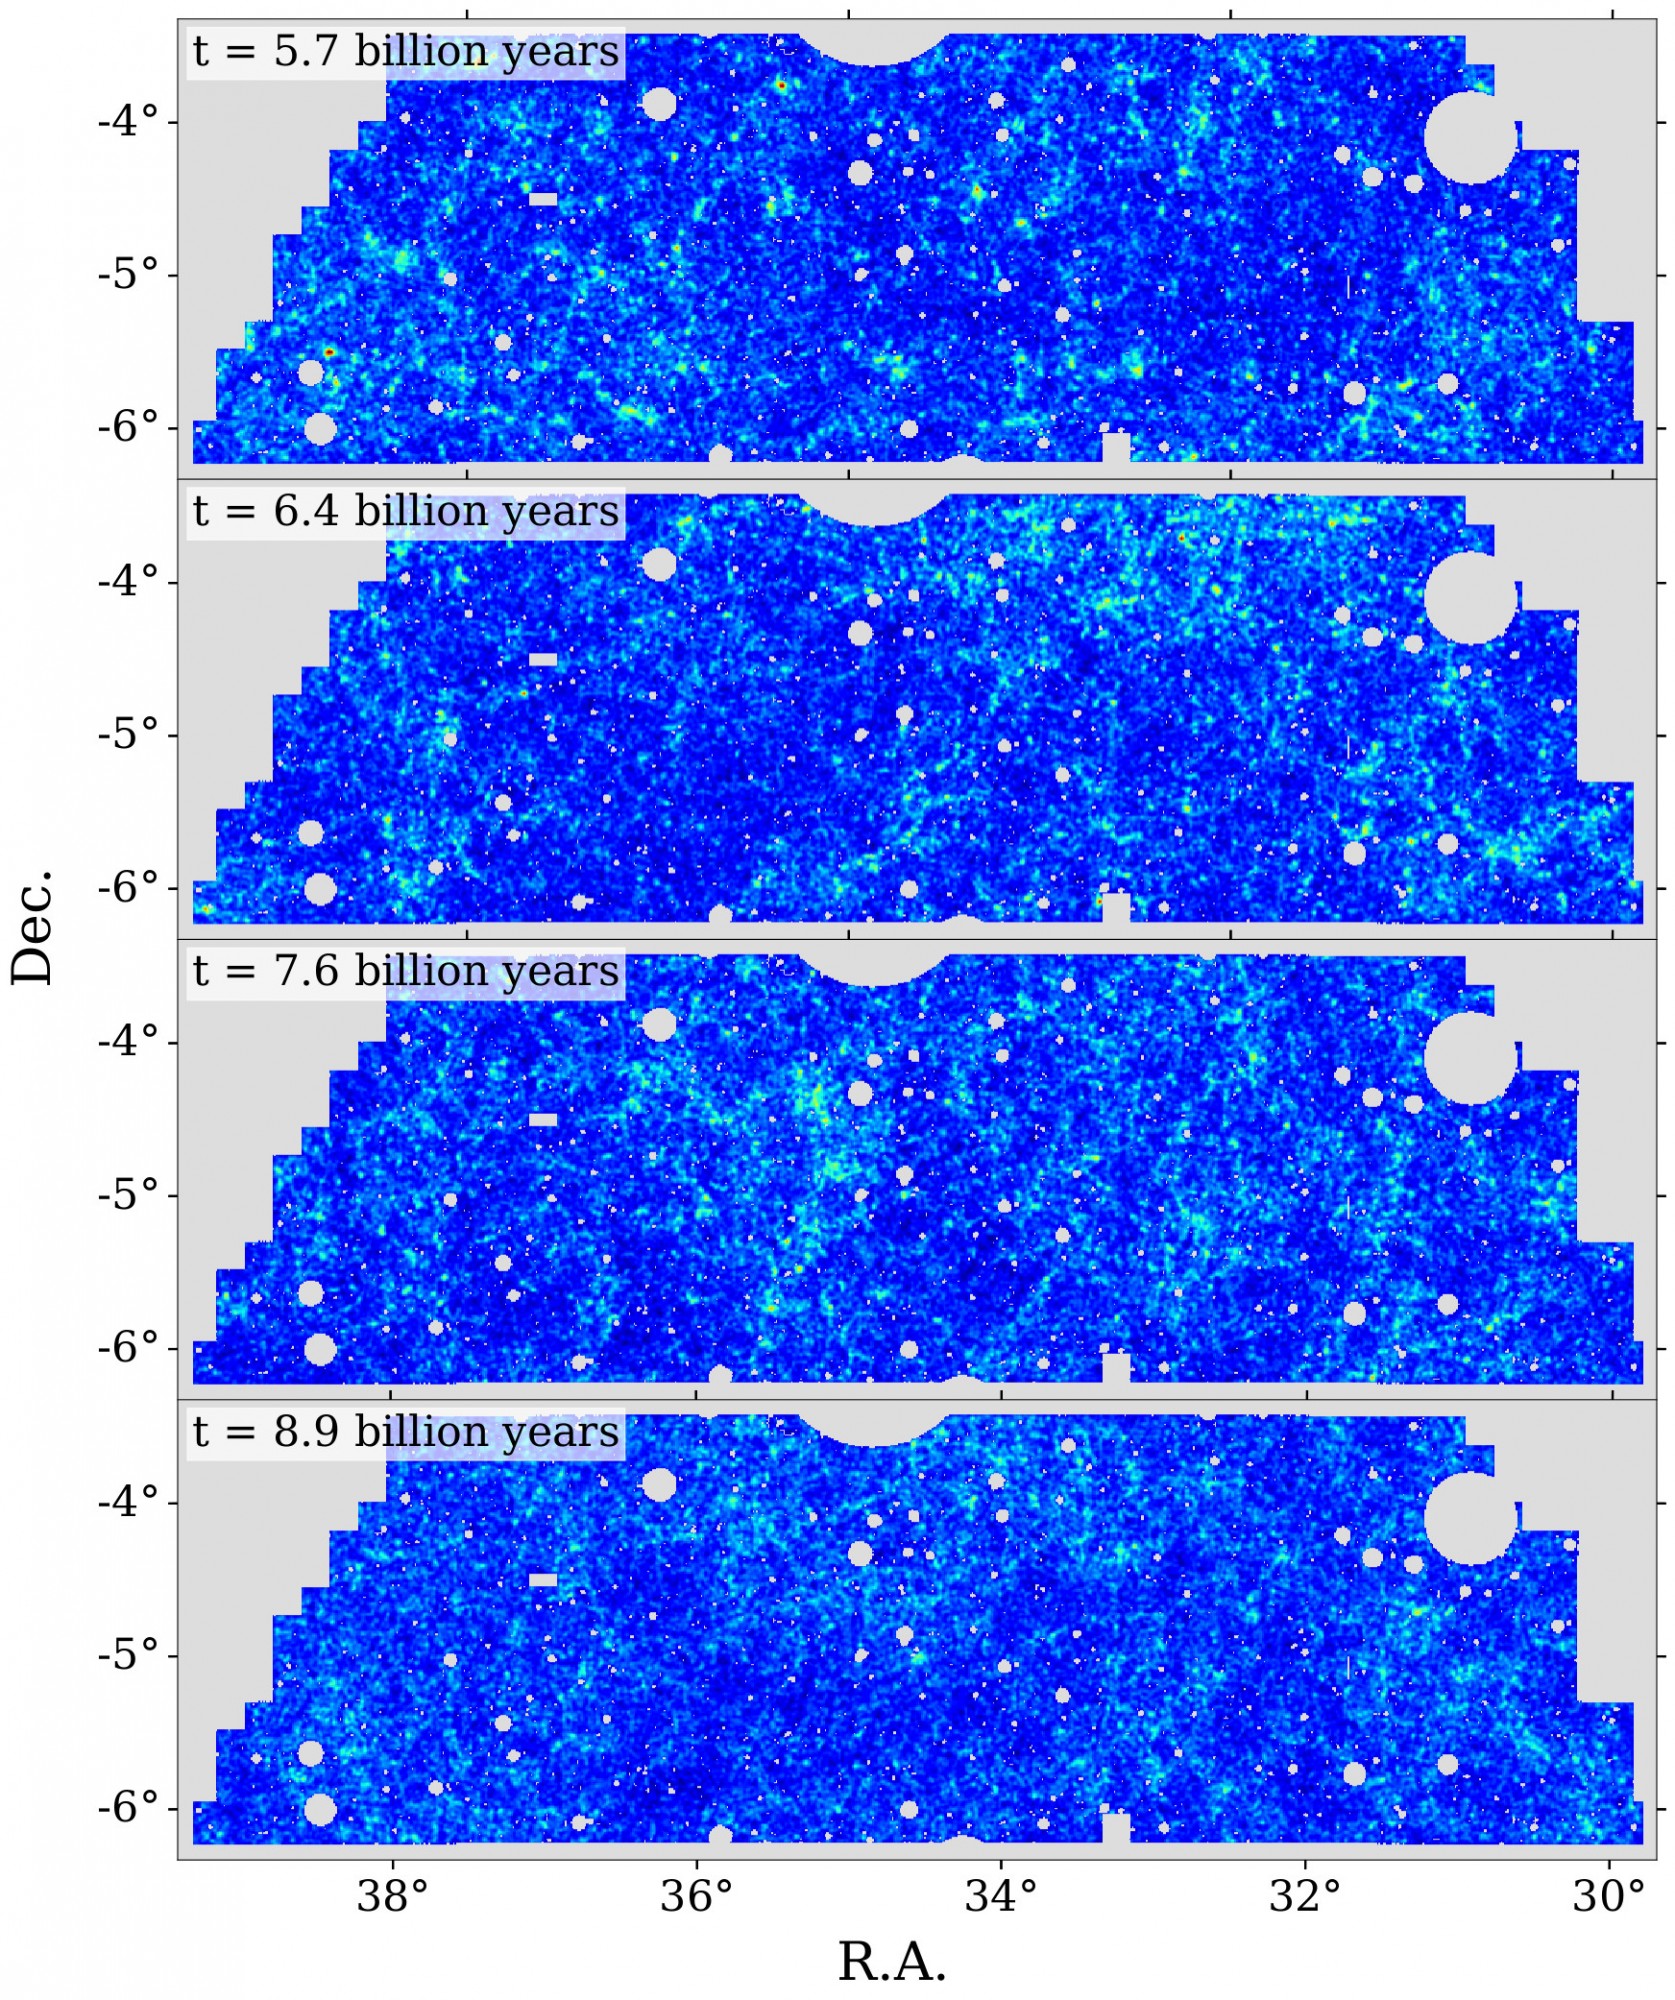 The distribution of galaxies at three different cosmic epochs from the Subaru Hyper Suprime-Cam survey.